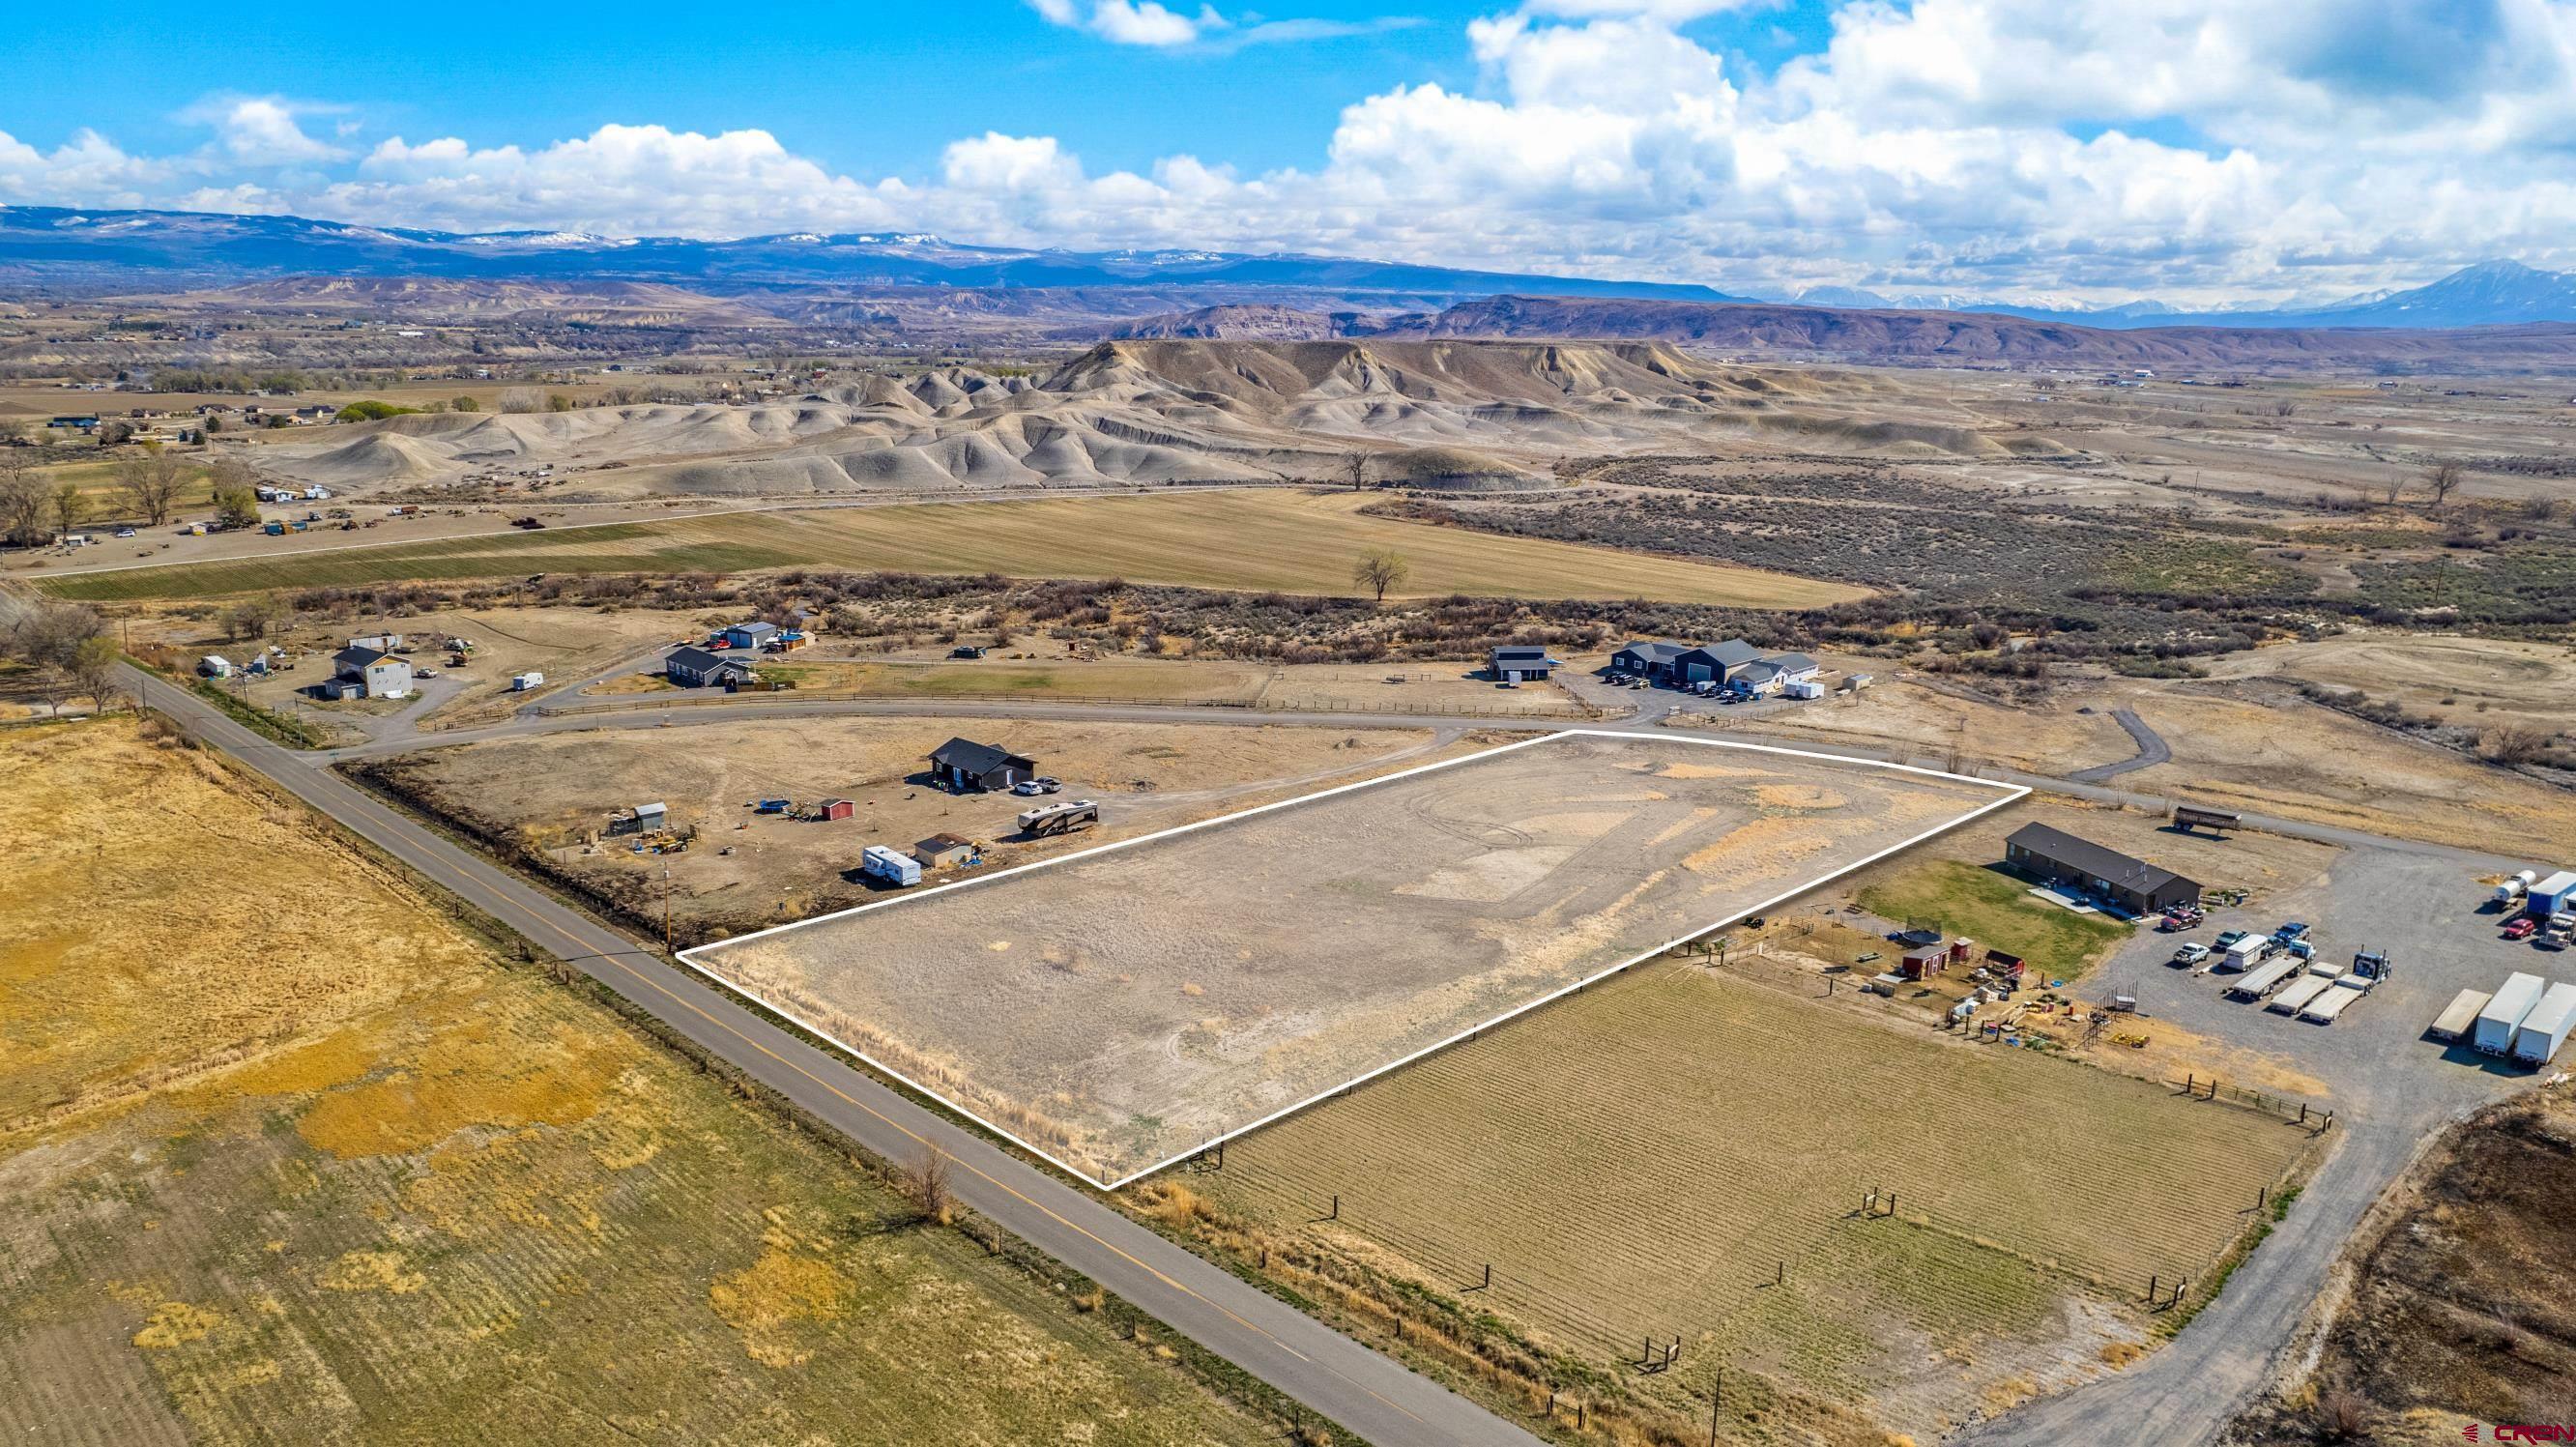 ARE you looking for an amazing Rural setting? This 3.49 acre irrigated lot with 1  share of Uncompahgre Water Users Association is waiting for you. Perfect for your new home build with plenty of room for animals, 4-H projects, toys and so much more! These lots are agricultural in nature and the taxes will be more affordable. Build your home, bring in a nice Modular or Erect that beautiful Barndominium and enjoy country living with close to town perks.  Minutes from downtown delta and only a half hour from Grand Junction or Montrose. The view from the wide open landscape are phenomenal.  Schedule your showing today before it's gone !!!